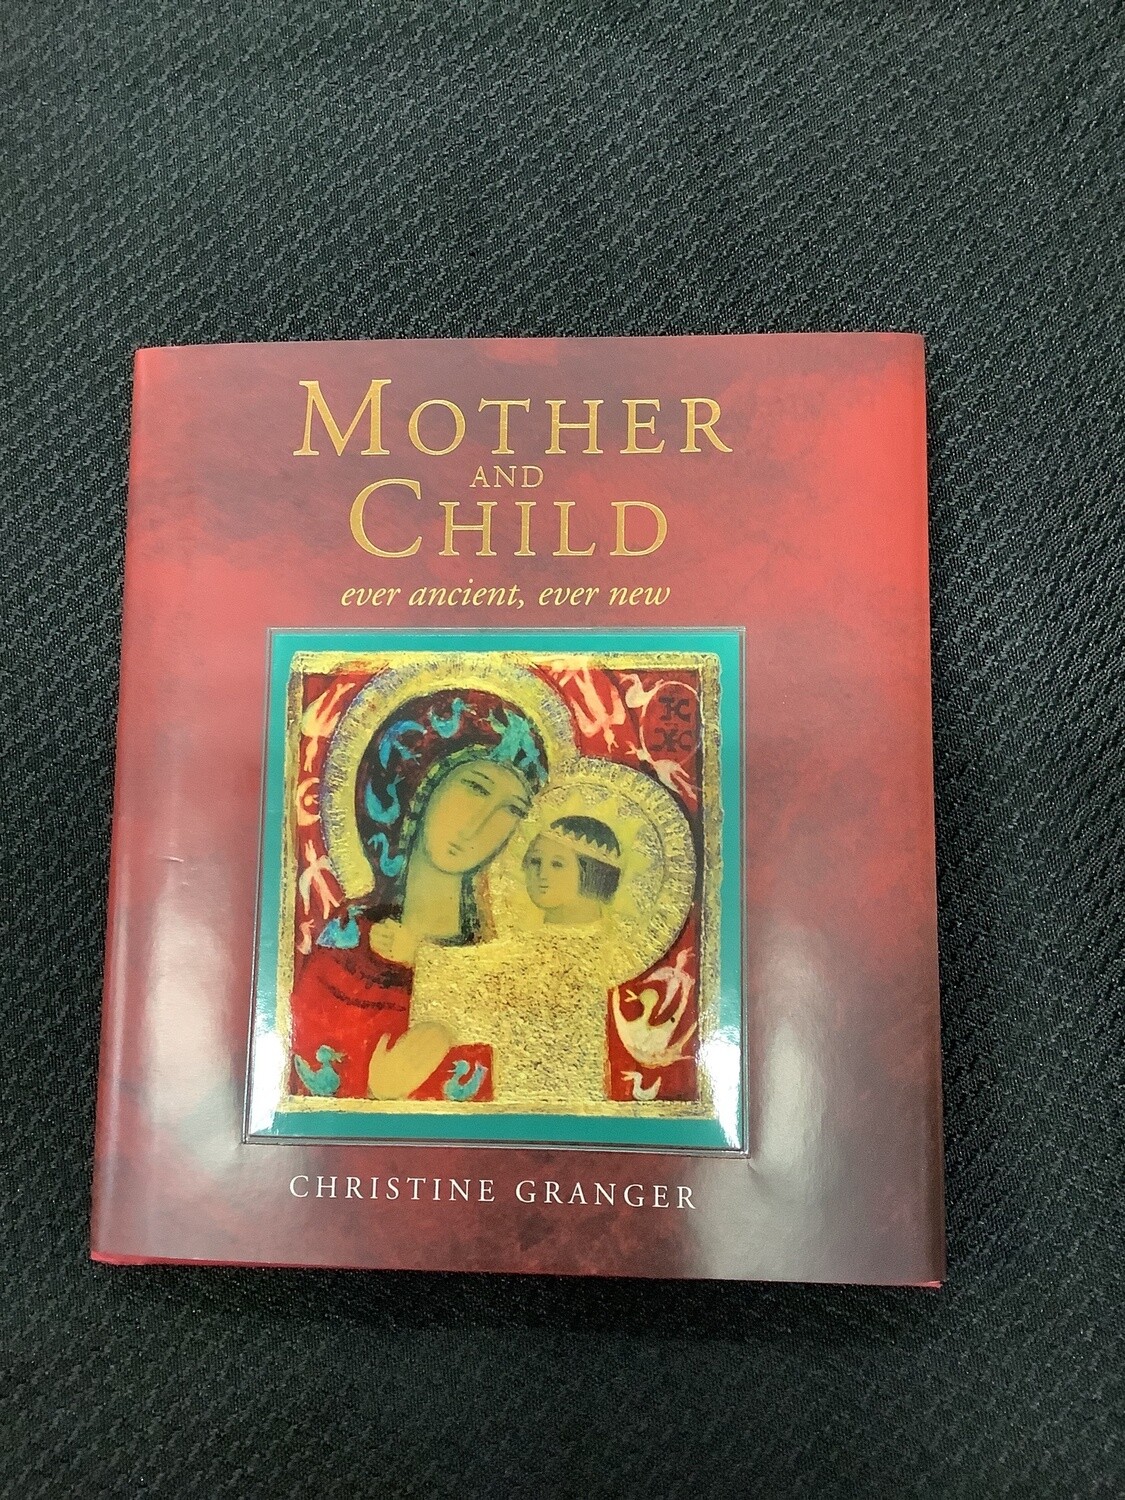 Mother And Child Ever Ancient, Ever New - Christine Granger